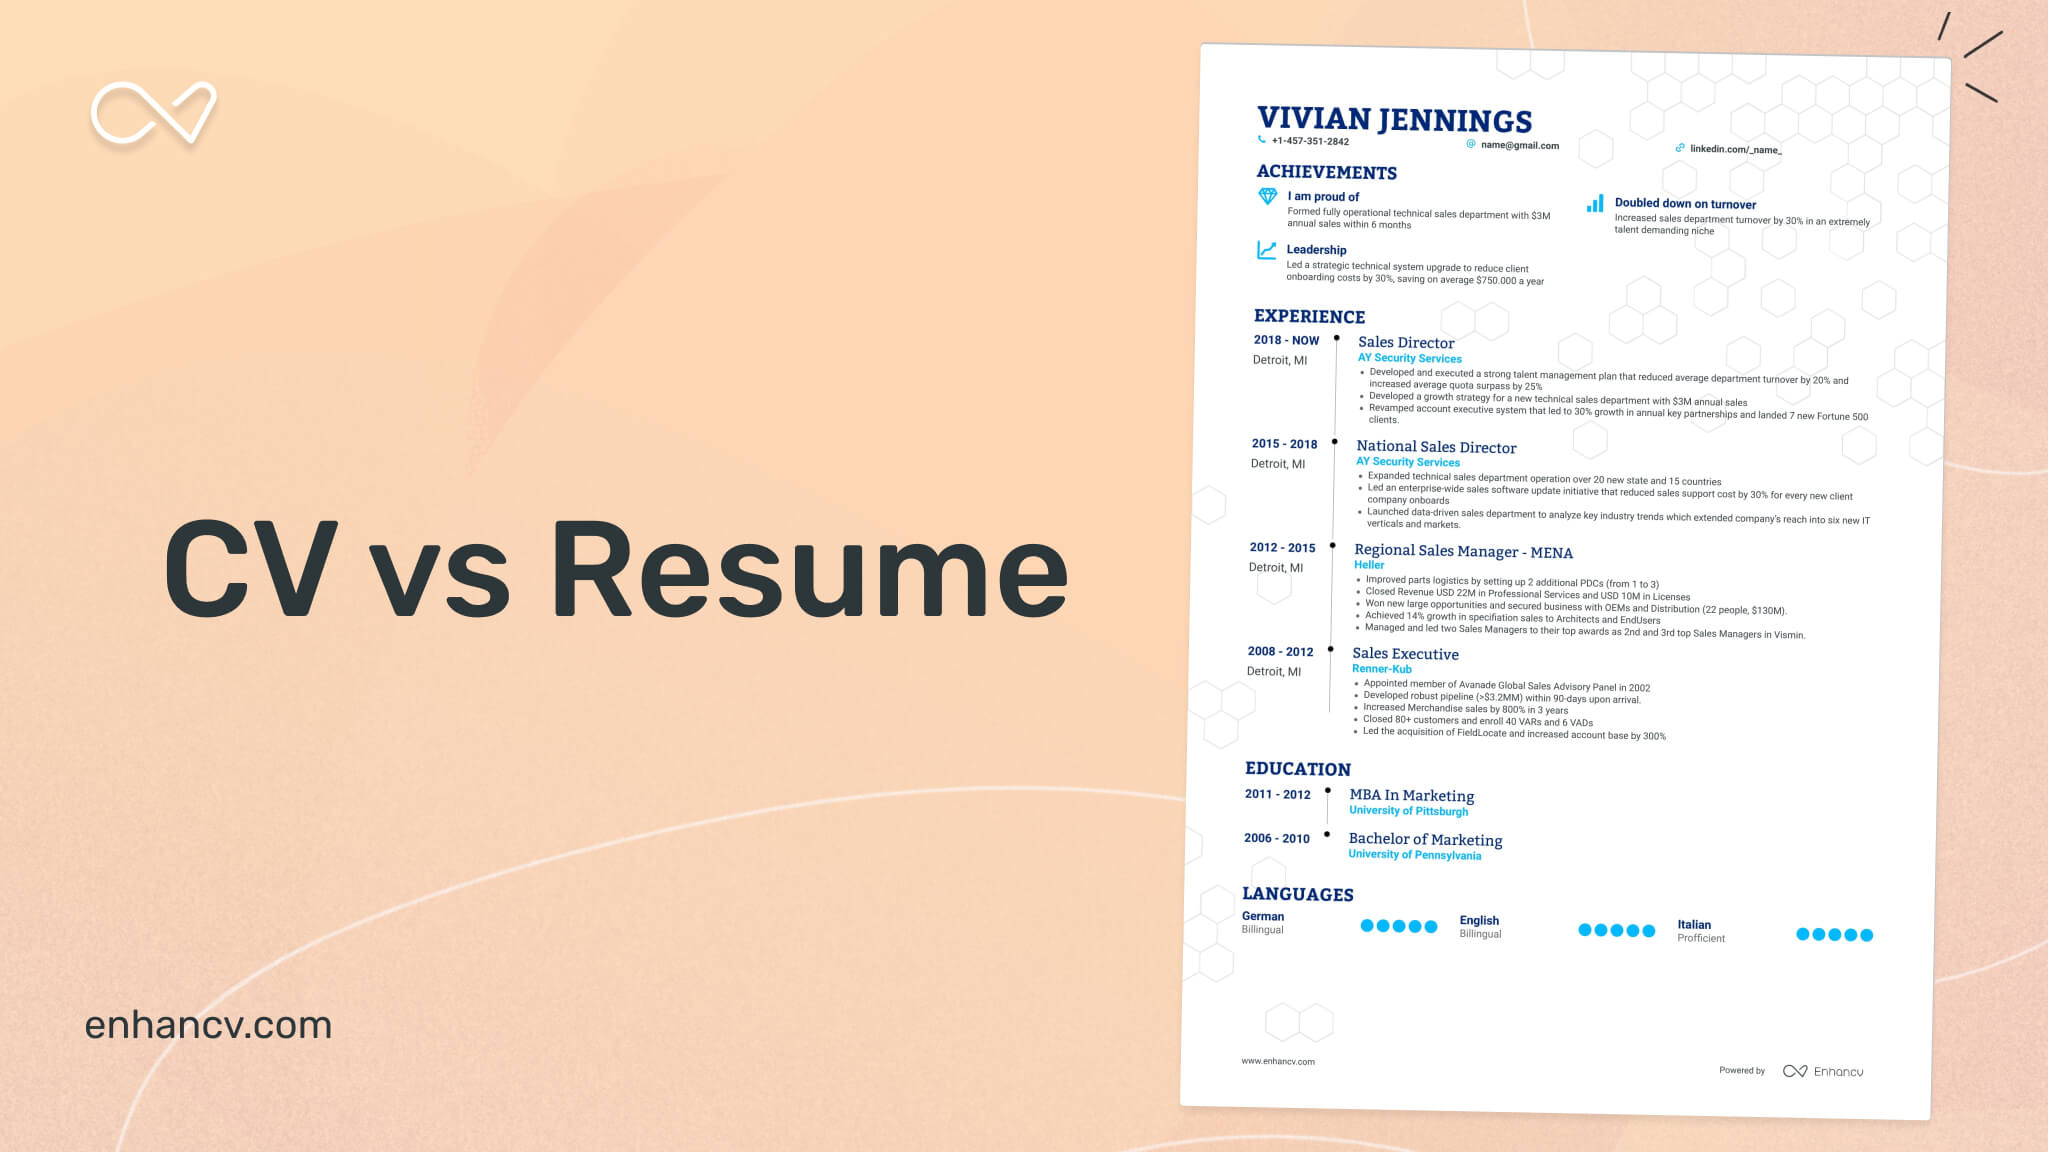 CV vs Resume: Differences, Similarities & Which One to Use